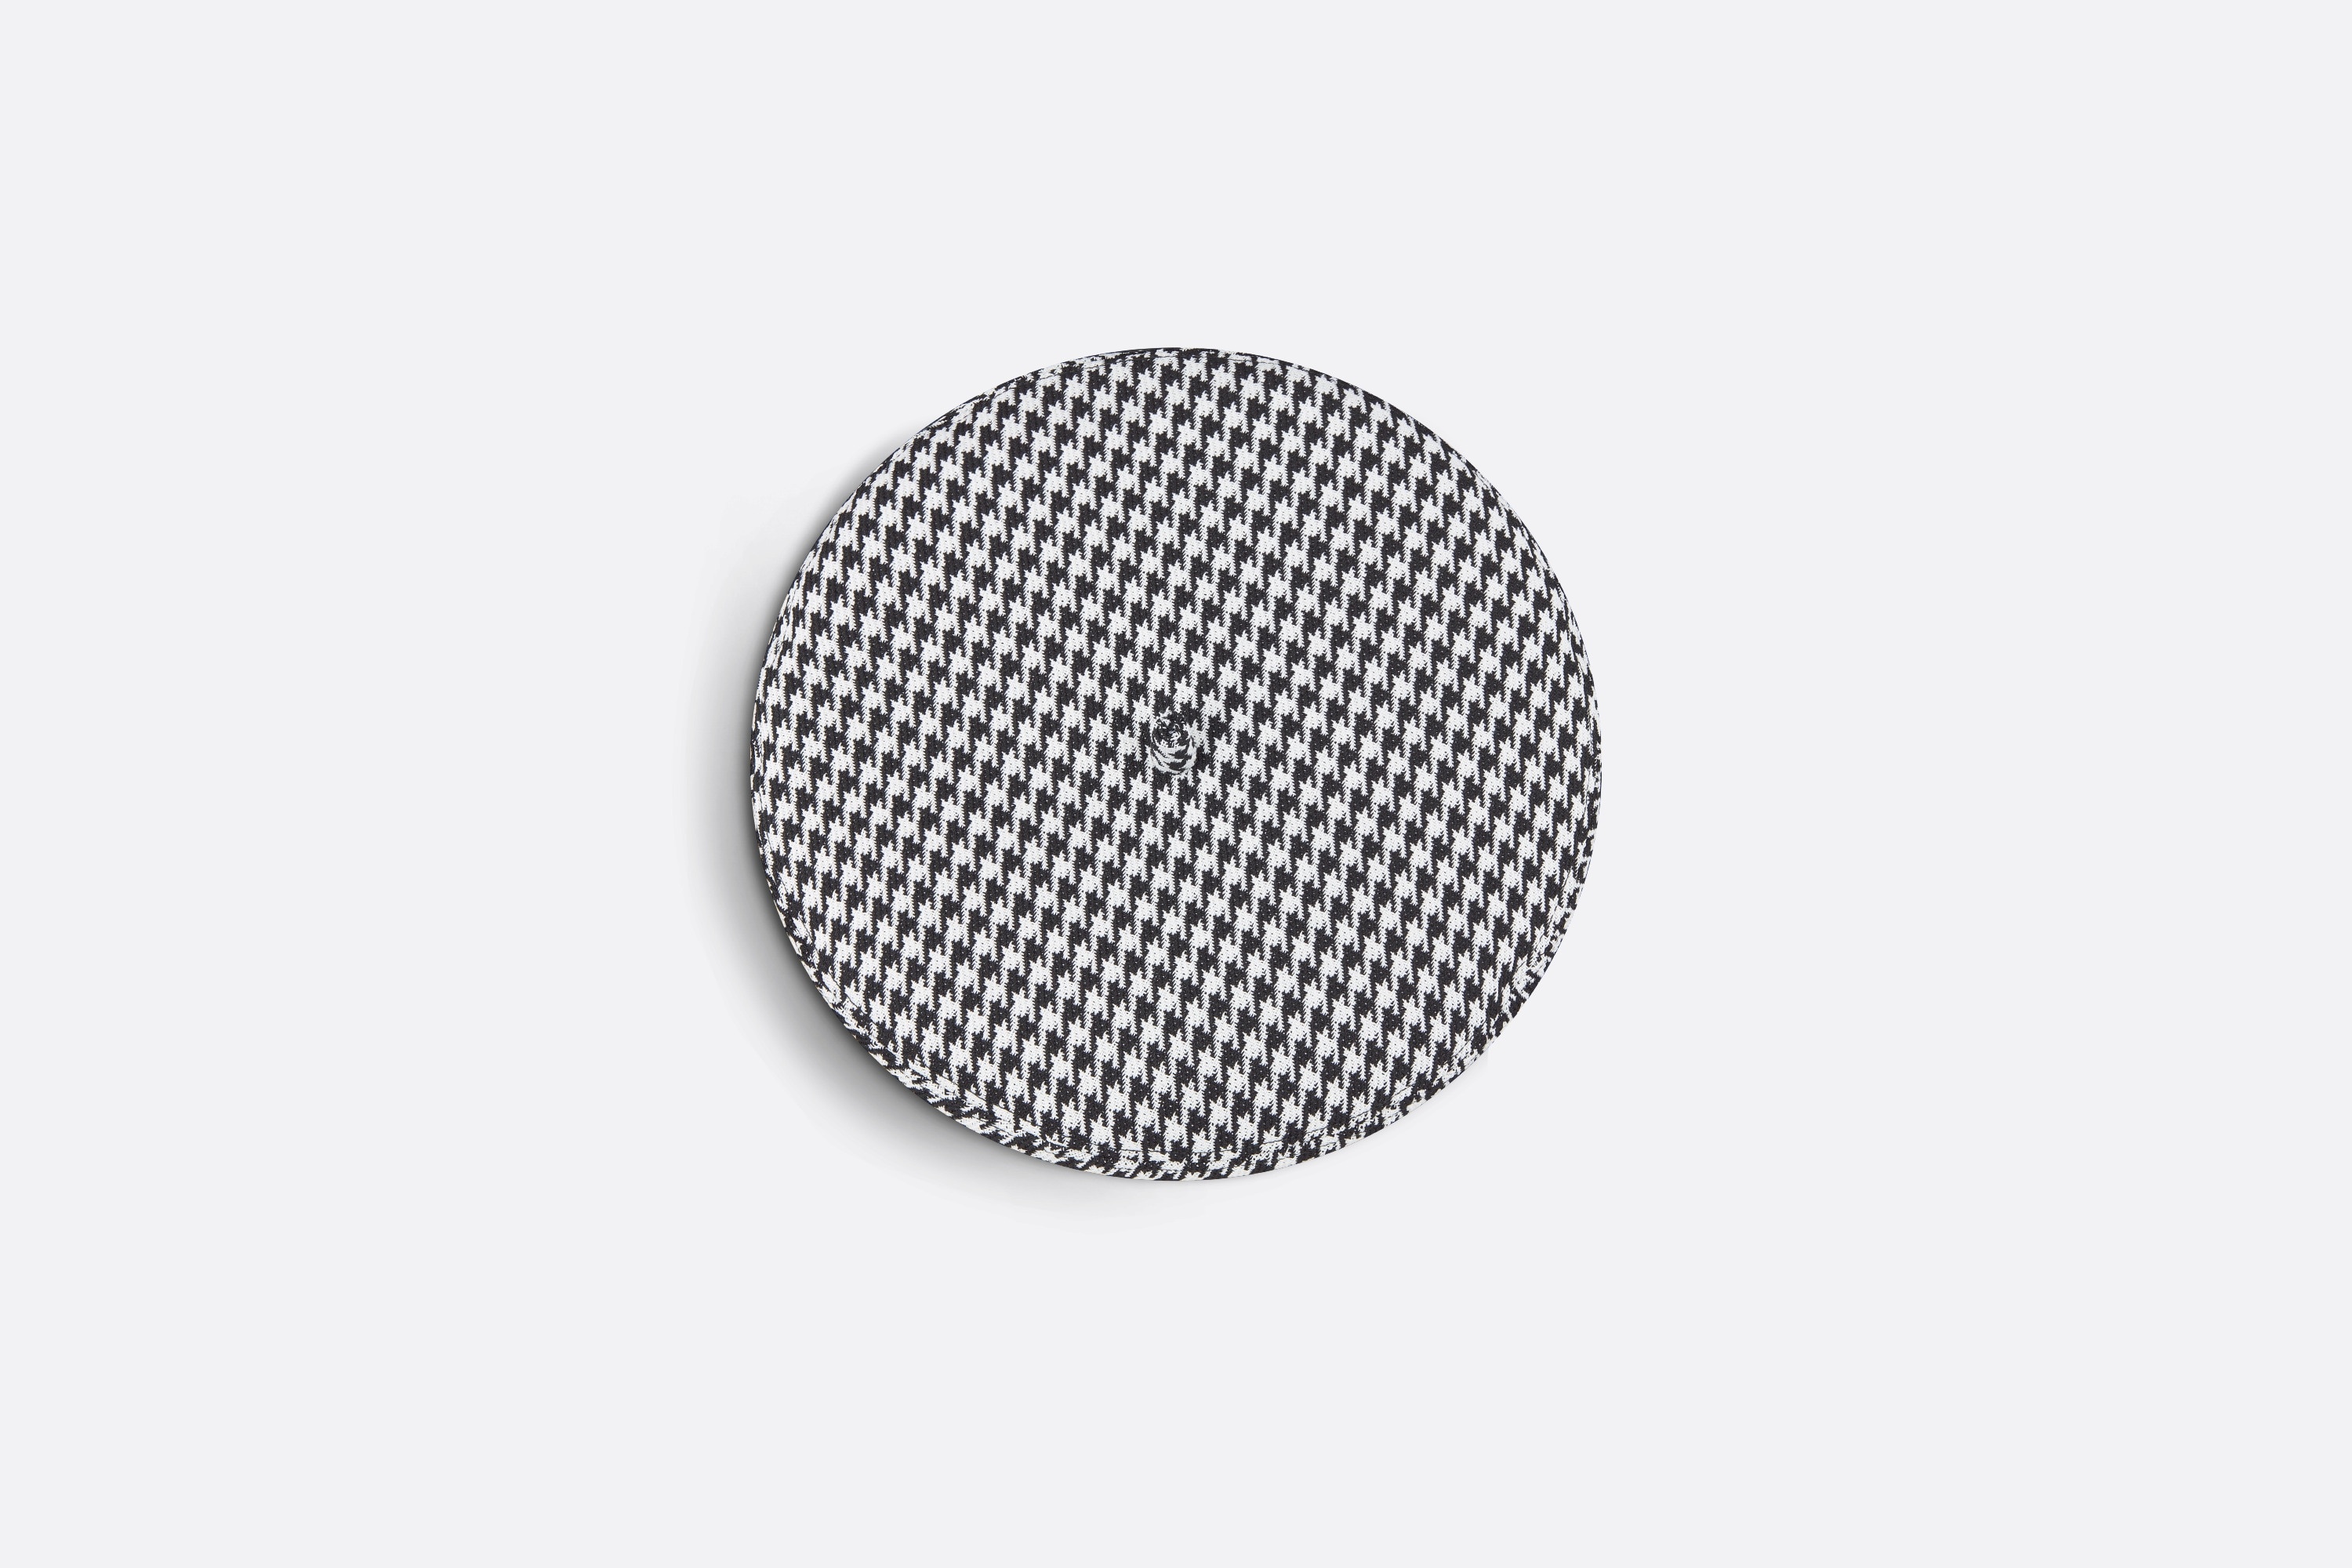 Dior Arty Houndstooth Beret with Bow - 5